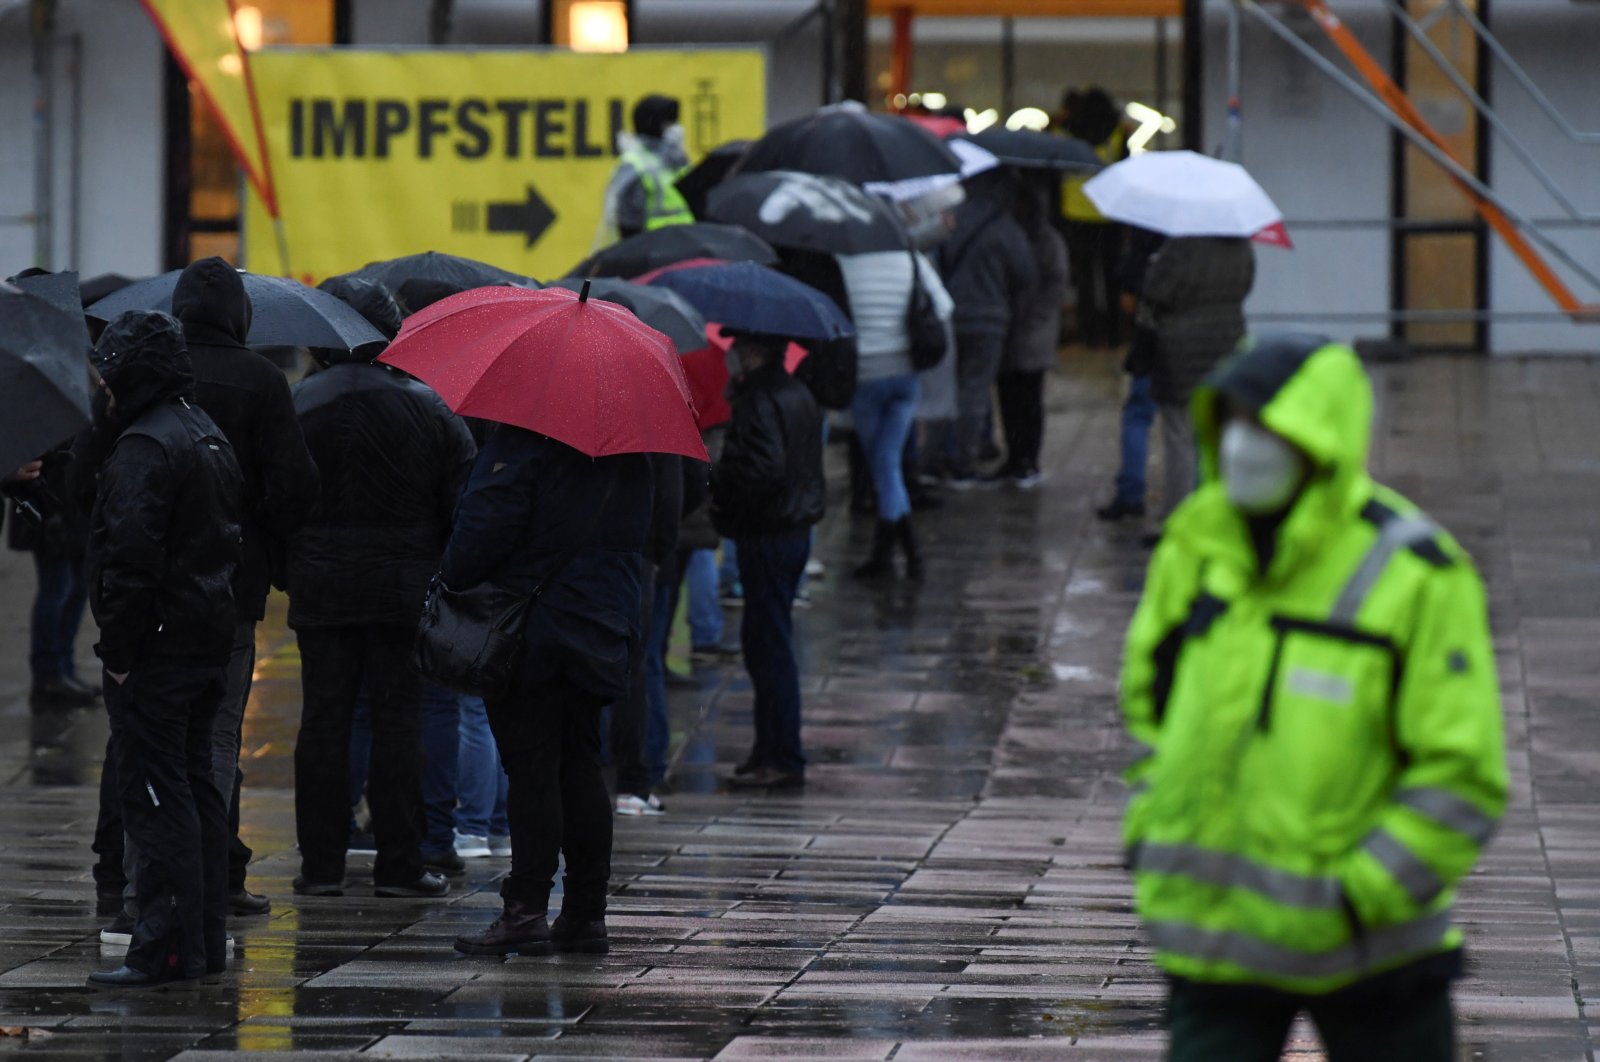 People hold umbrellas as they queue outside a vaccination center amid the COVID-19 pandemic during rainfall in the district of Marzahn-Hellersdorf, Berlin, Germany, Dec. 1, 2021. (Reuters Photo)